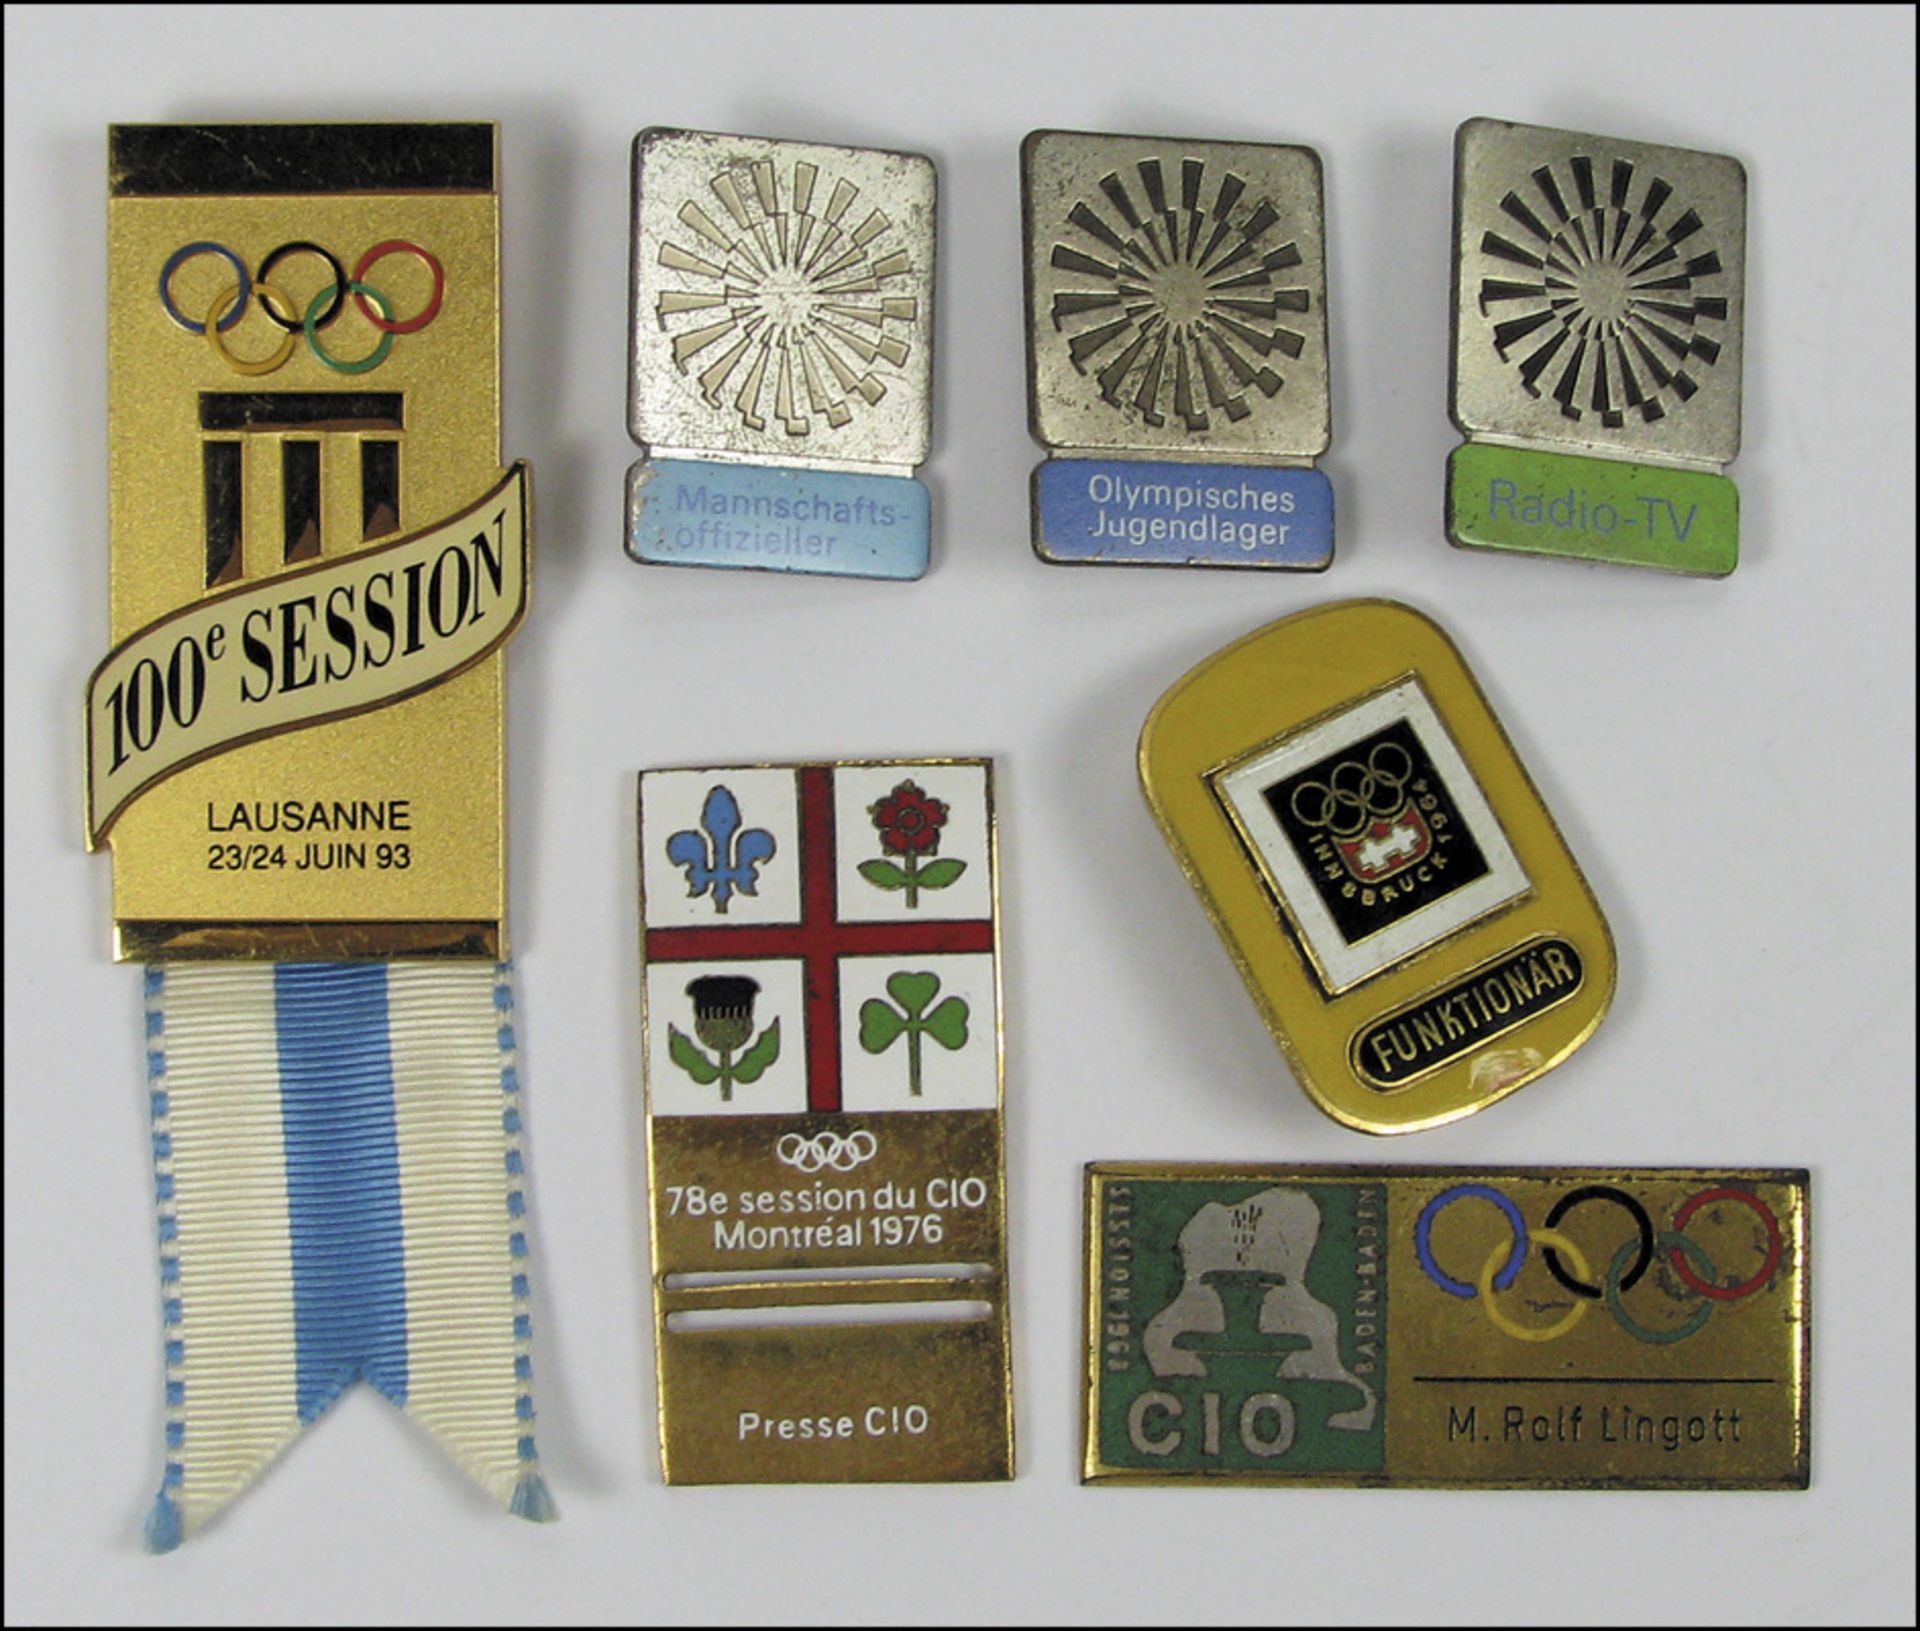 Olympic Games 1972 - 1993 Badegs - Omnisbus of various participation badges from Olympic Games 1972 